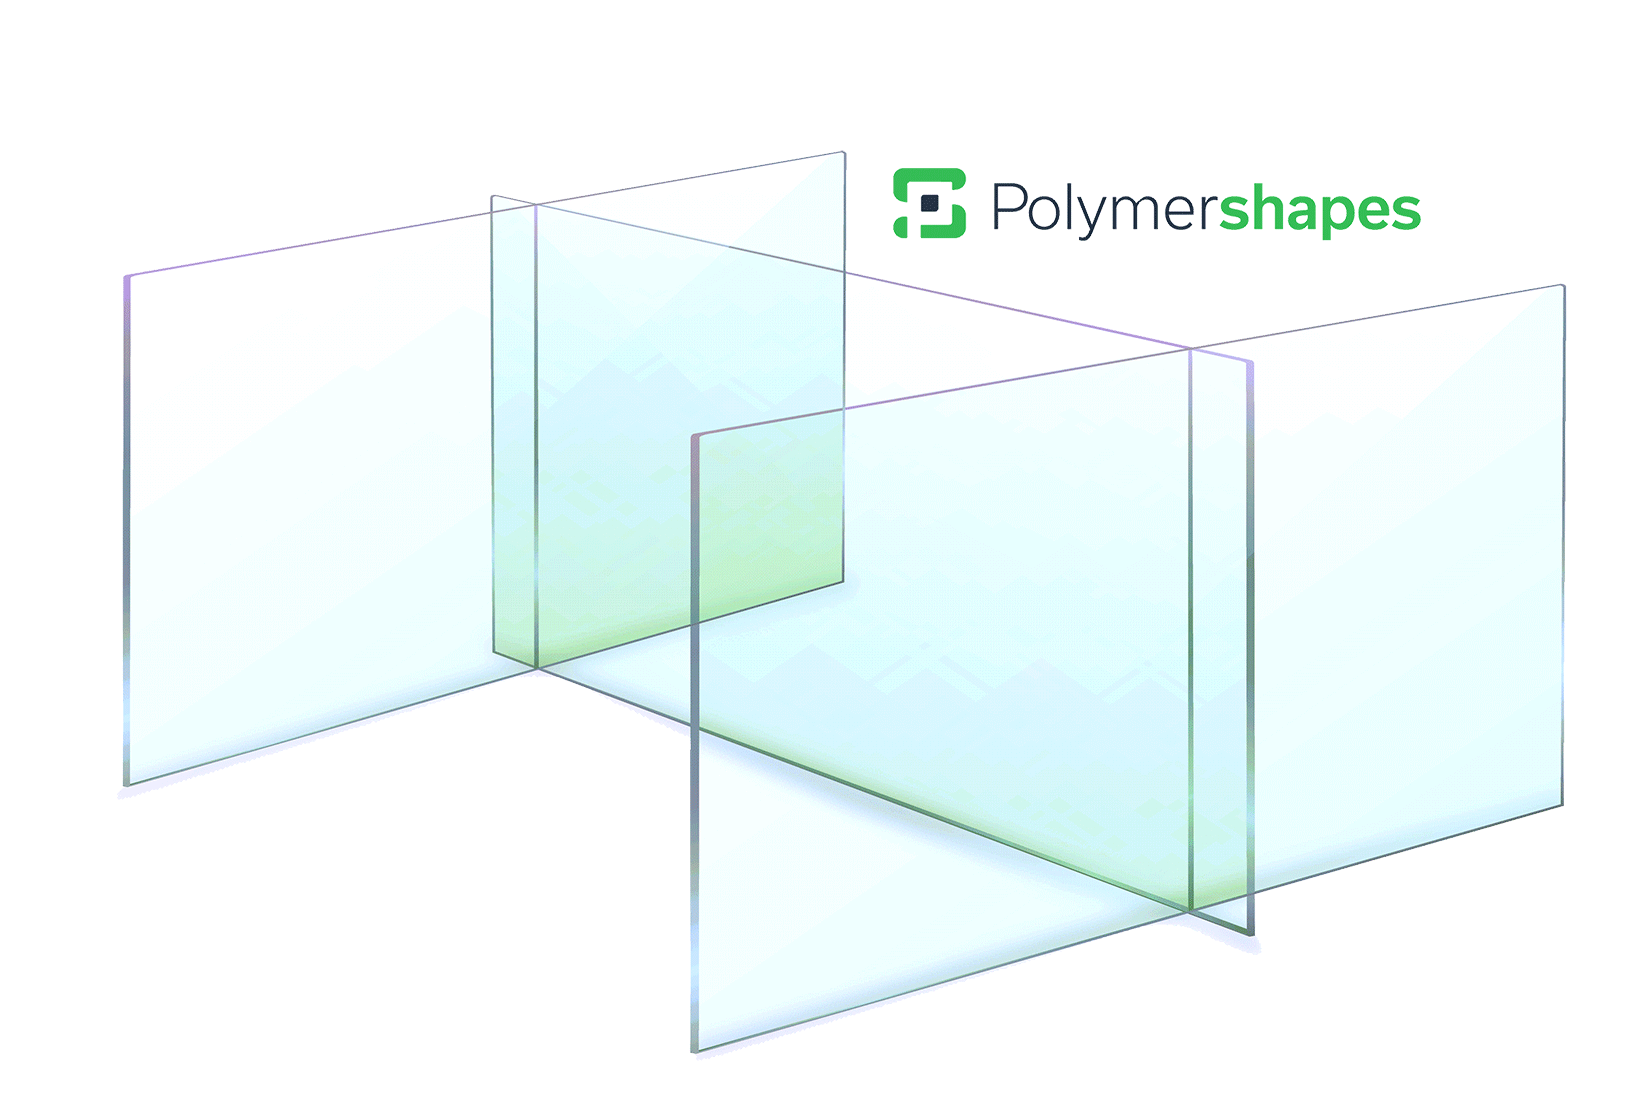 Polymershapes